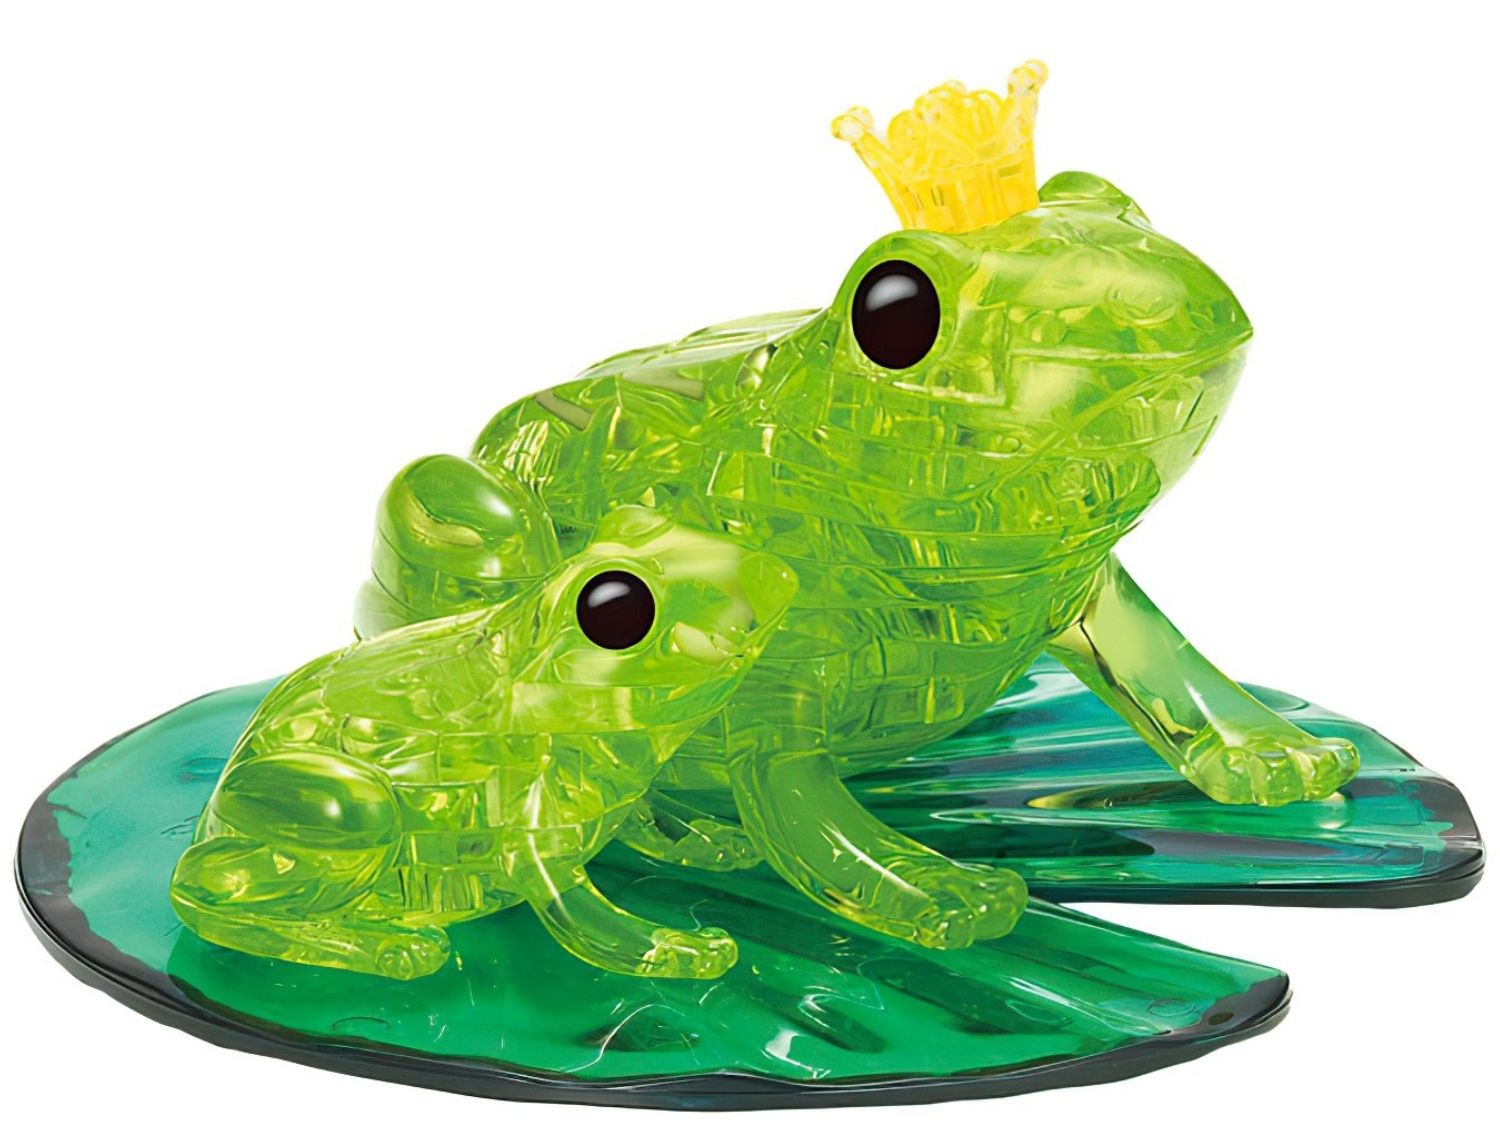 Beverly • Animal • Frog　42 PCS　Crystal 3D Puzzle